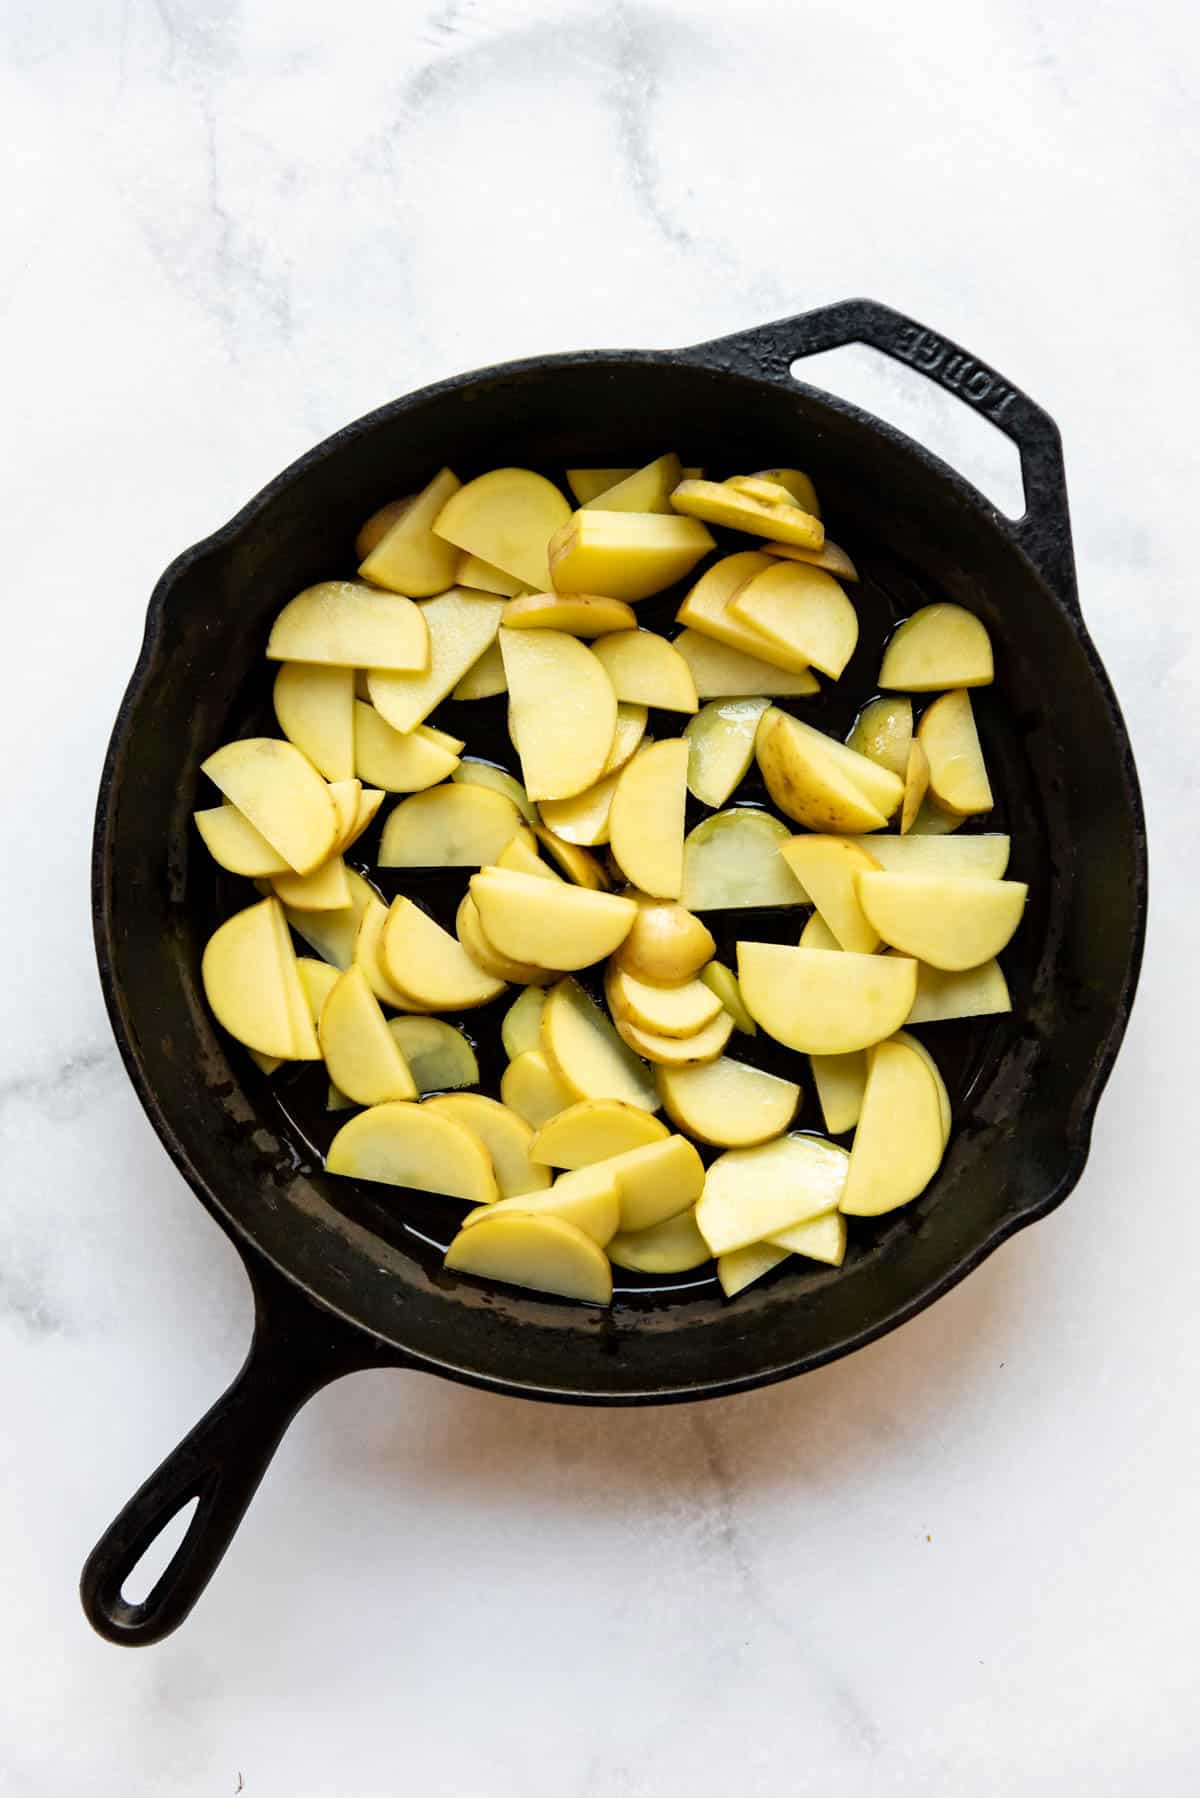 Frying sliced potatoes in oil in a cast iron skillet.